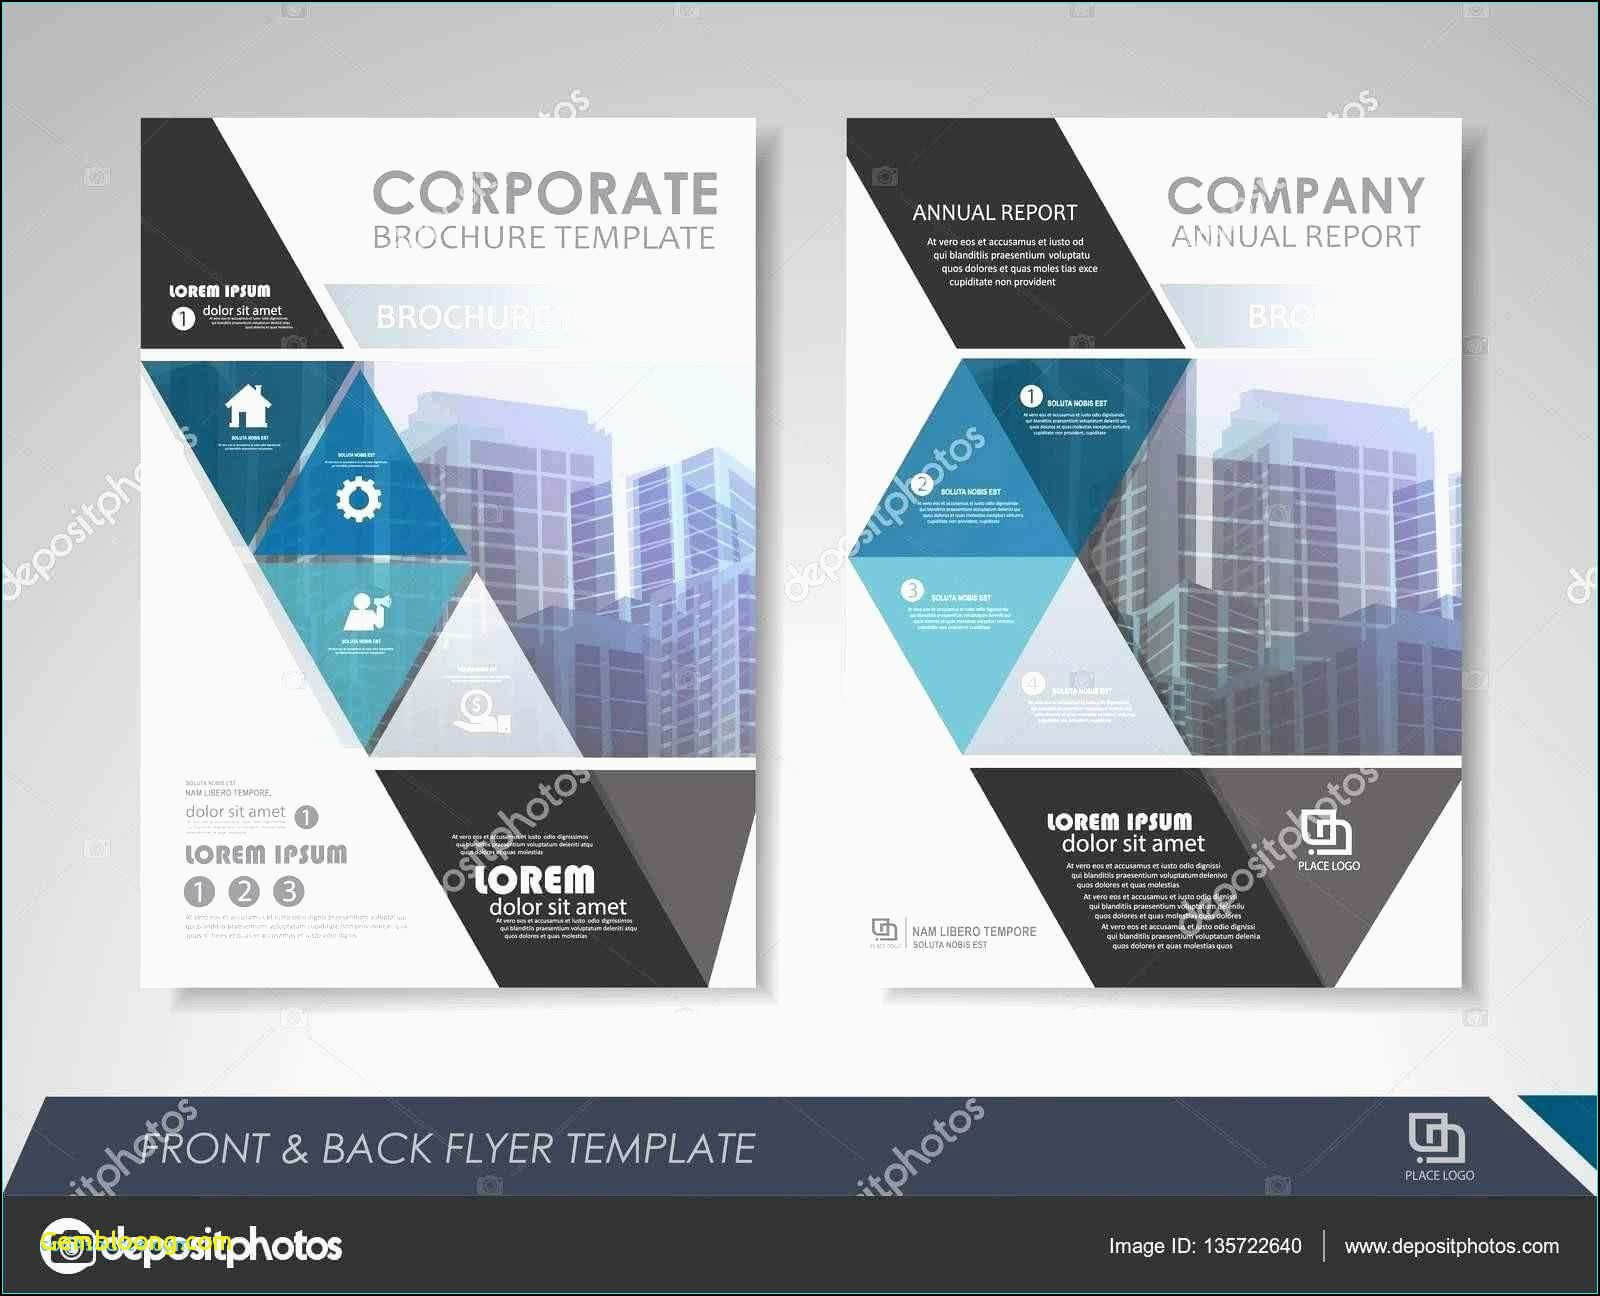 Unique 28 A4 Tri Fold Brochure Template Psd Free Download With Regard To Real Estate Brochure Templates Psd Free Download